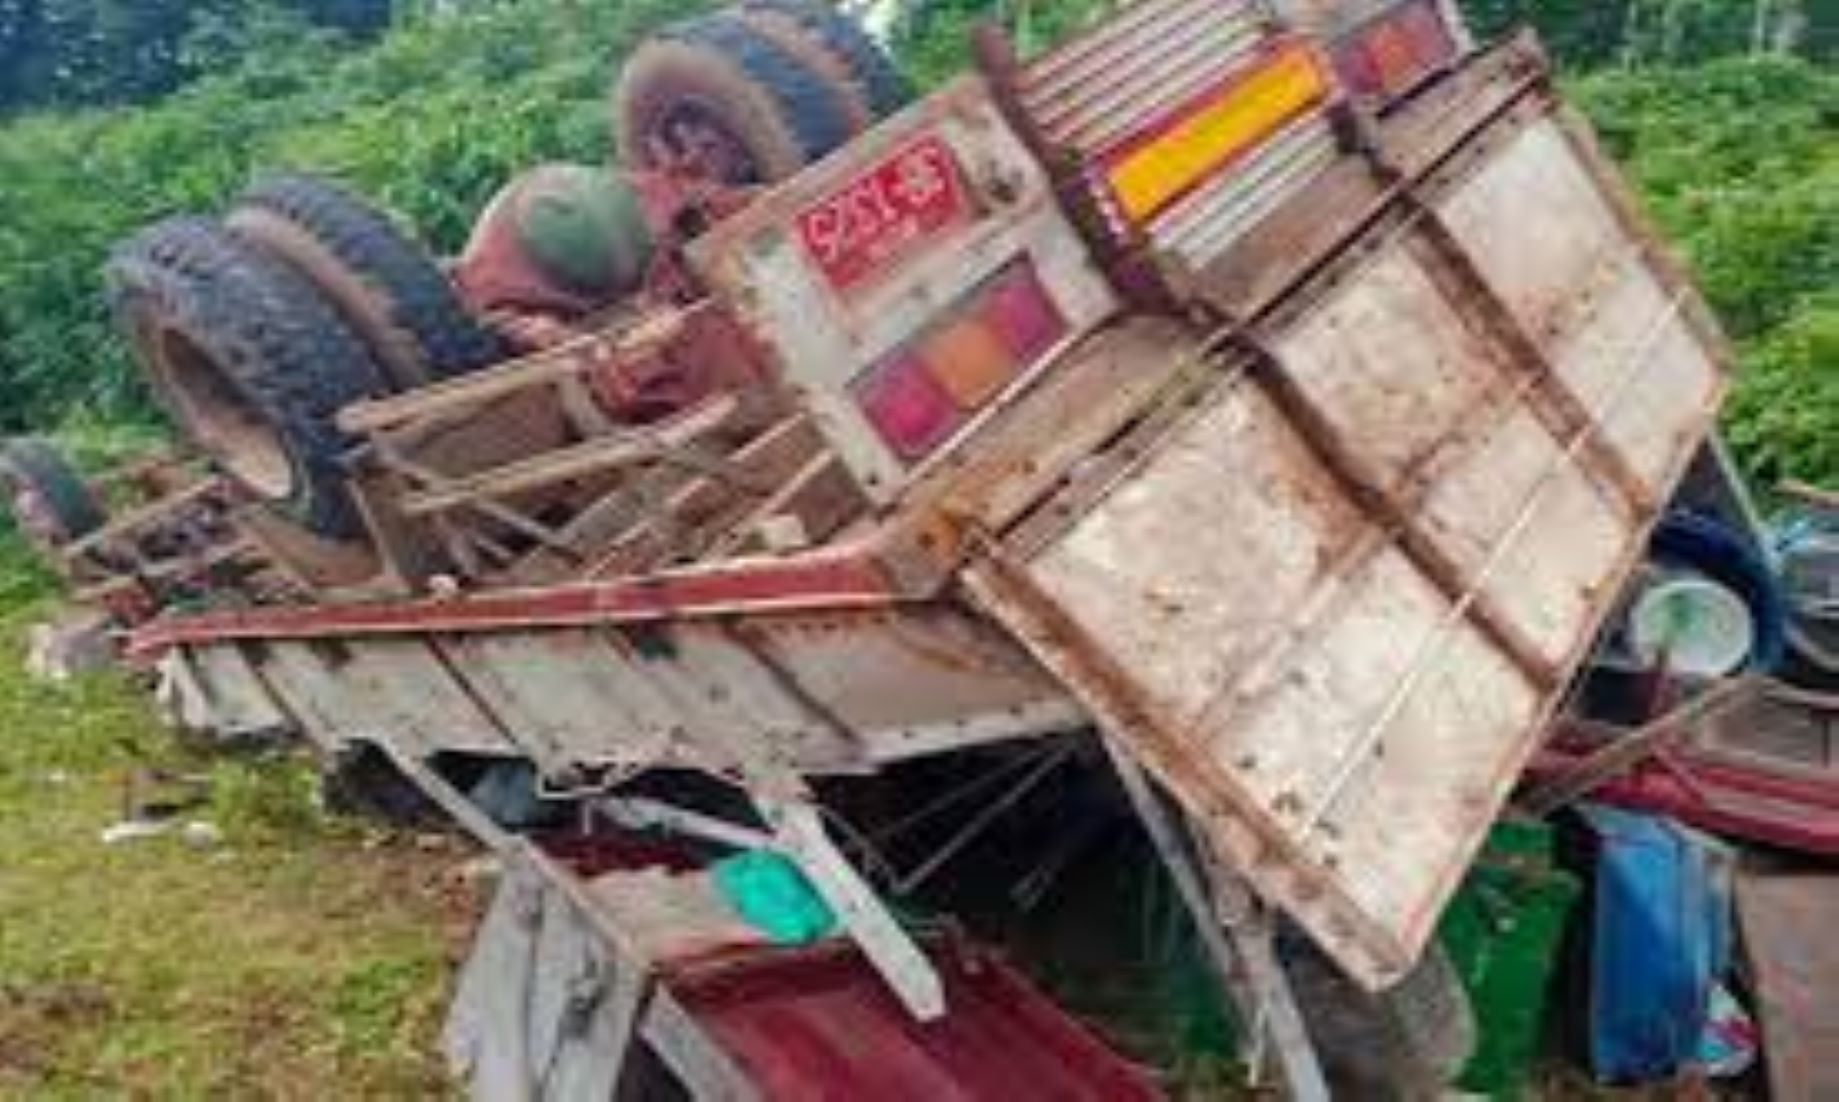 Seven dead, Many Injured As Vehicle Overturned In Myanmar